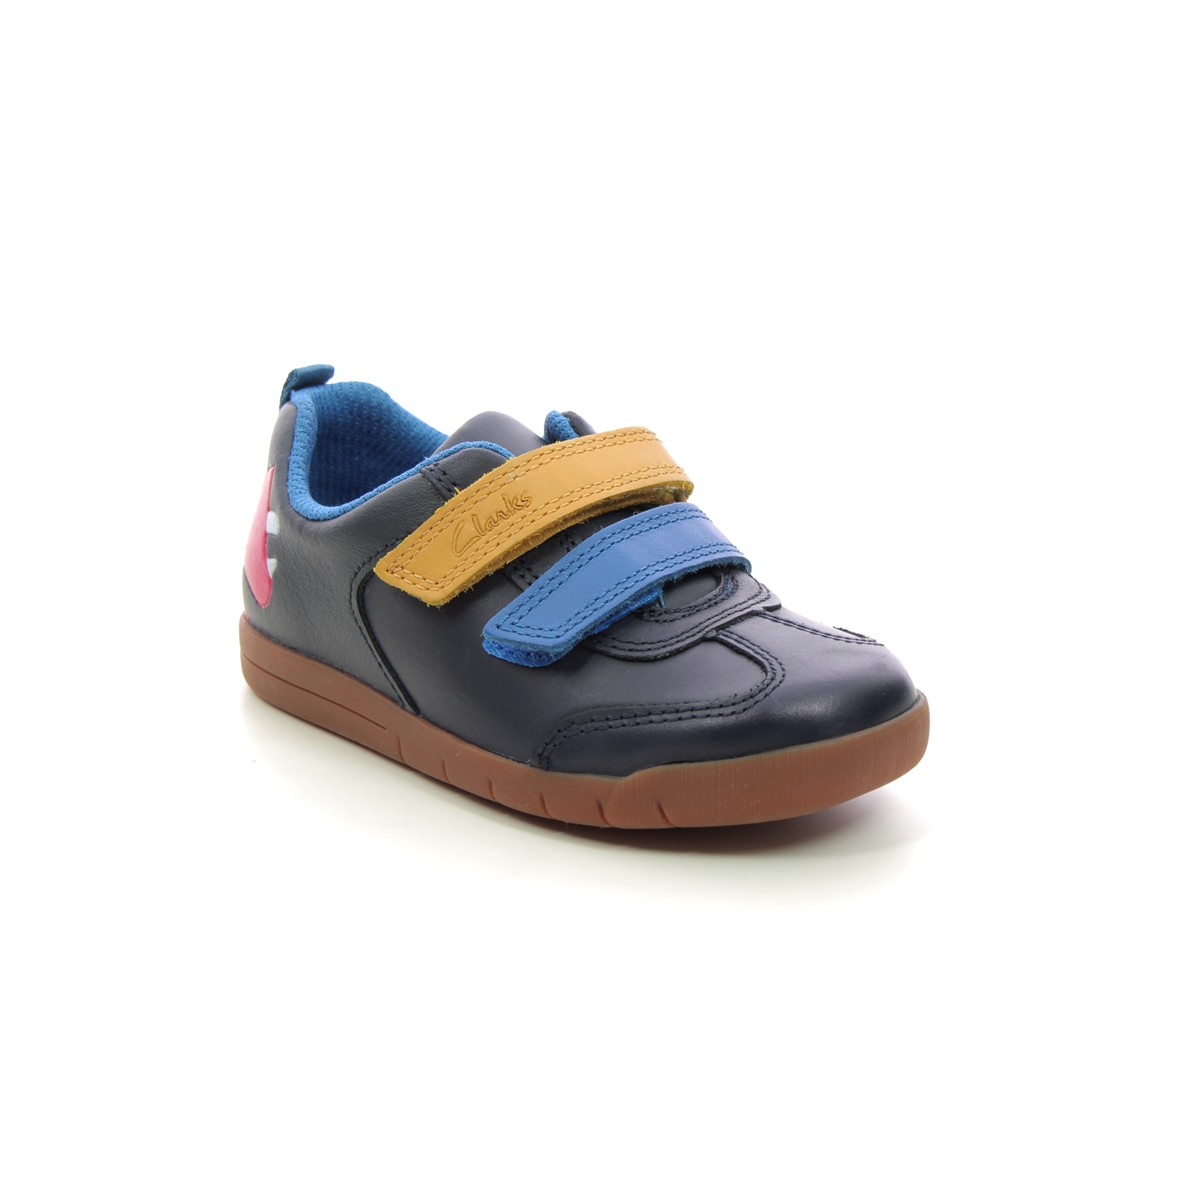 Clarks Den Play T Navy Leather Kids Boys Toddler Shoes 715906F In Size 6 In Plain Navy Leather F Width Fitting Regular Fit For kids